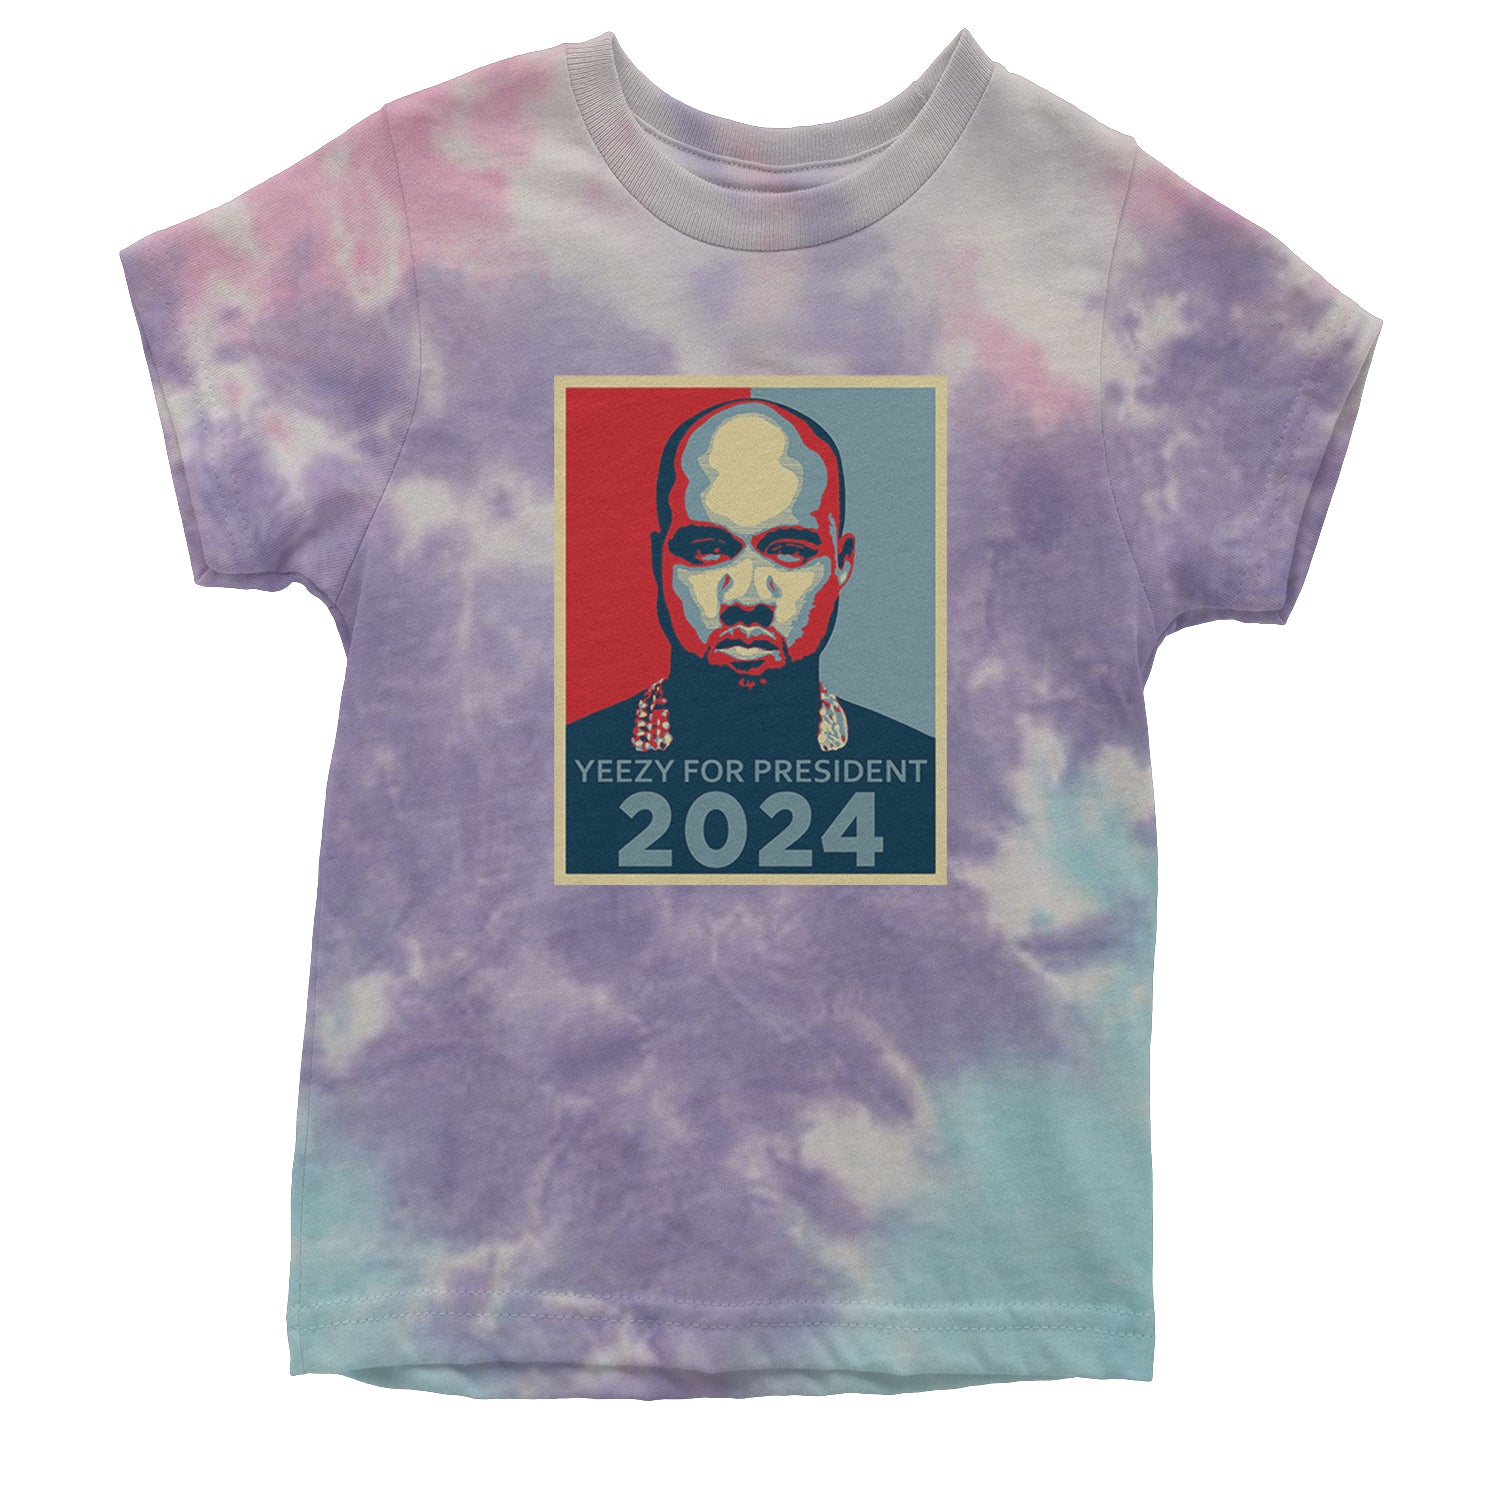 Yeezus For President Vote for Ye Youth T-shirt Tie-Dye Cotton Candy